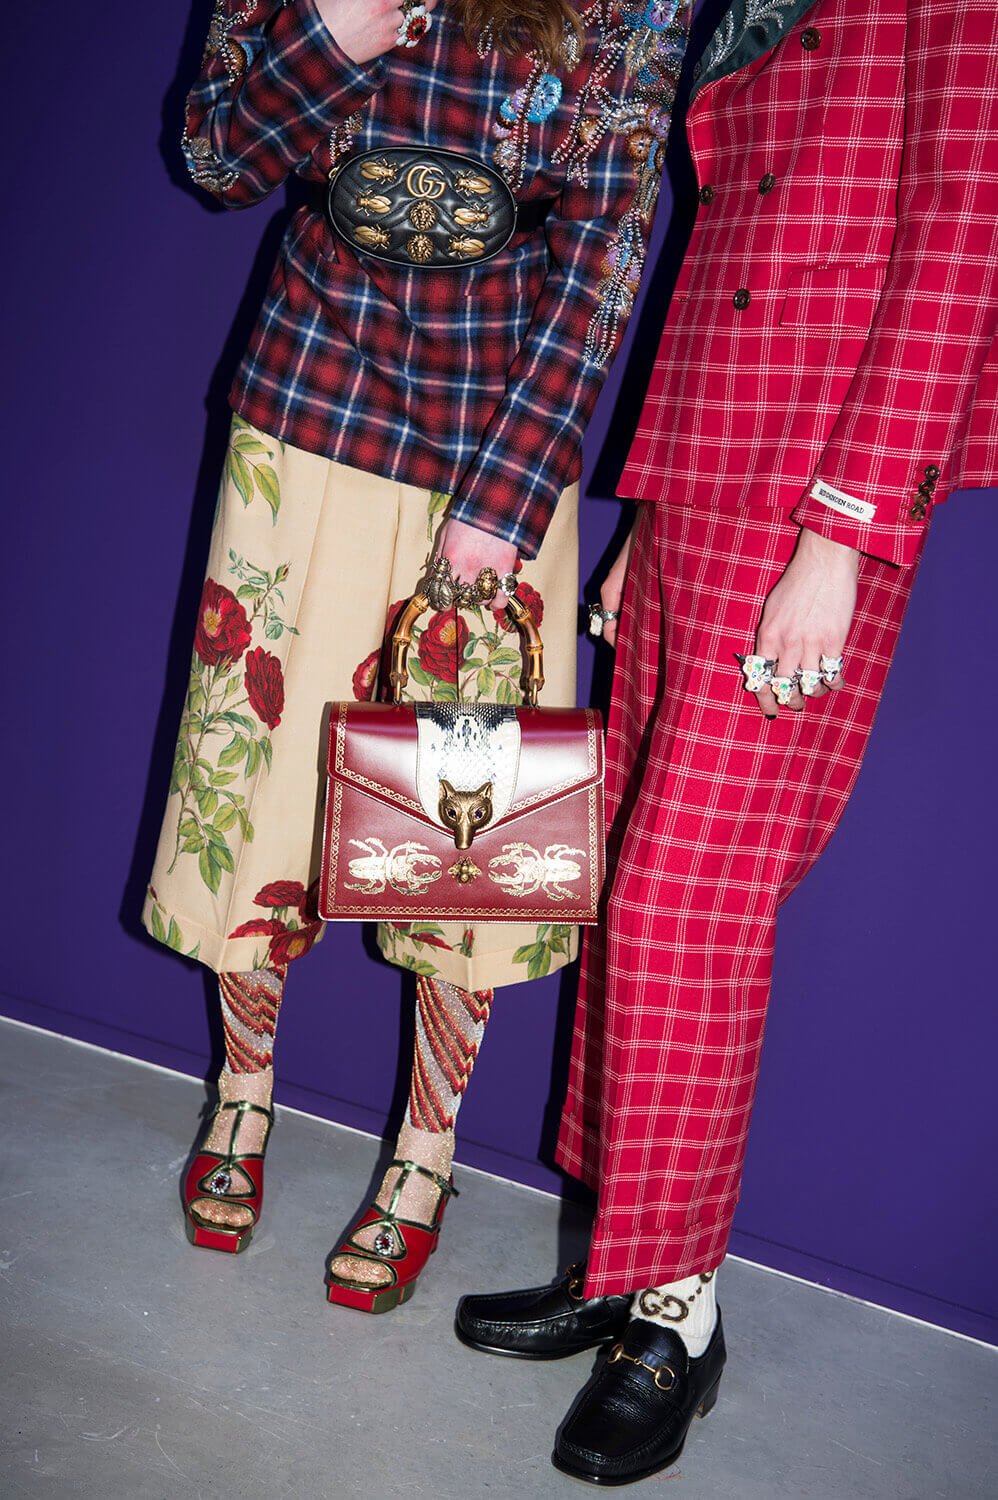 Gucci Show Their AW17 Men's and Women's Collections at MFW - 10 